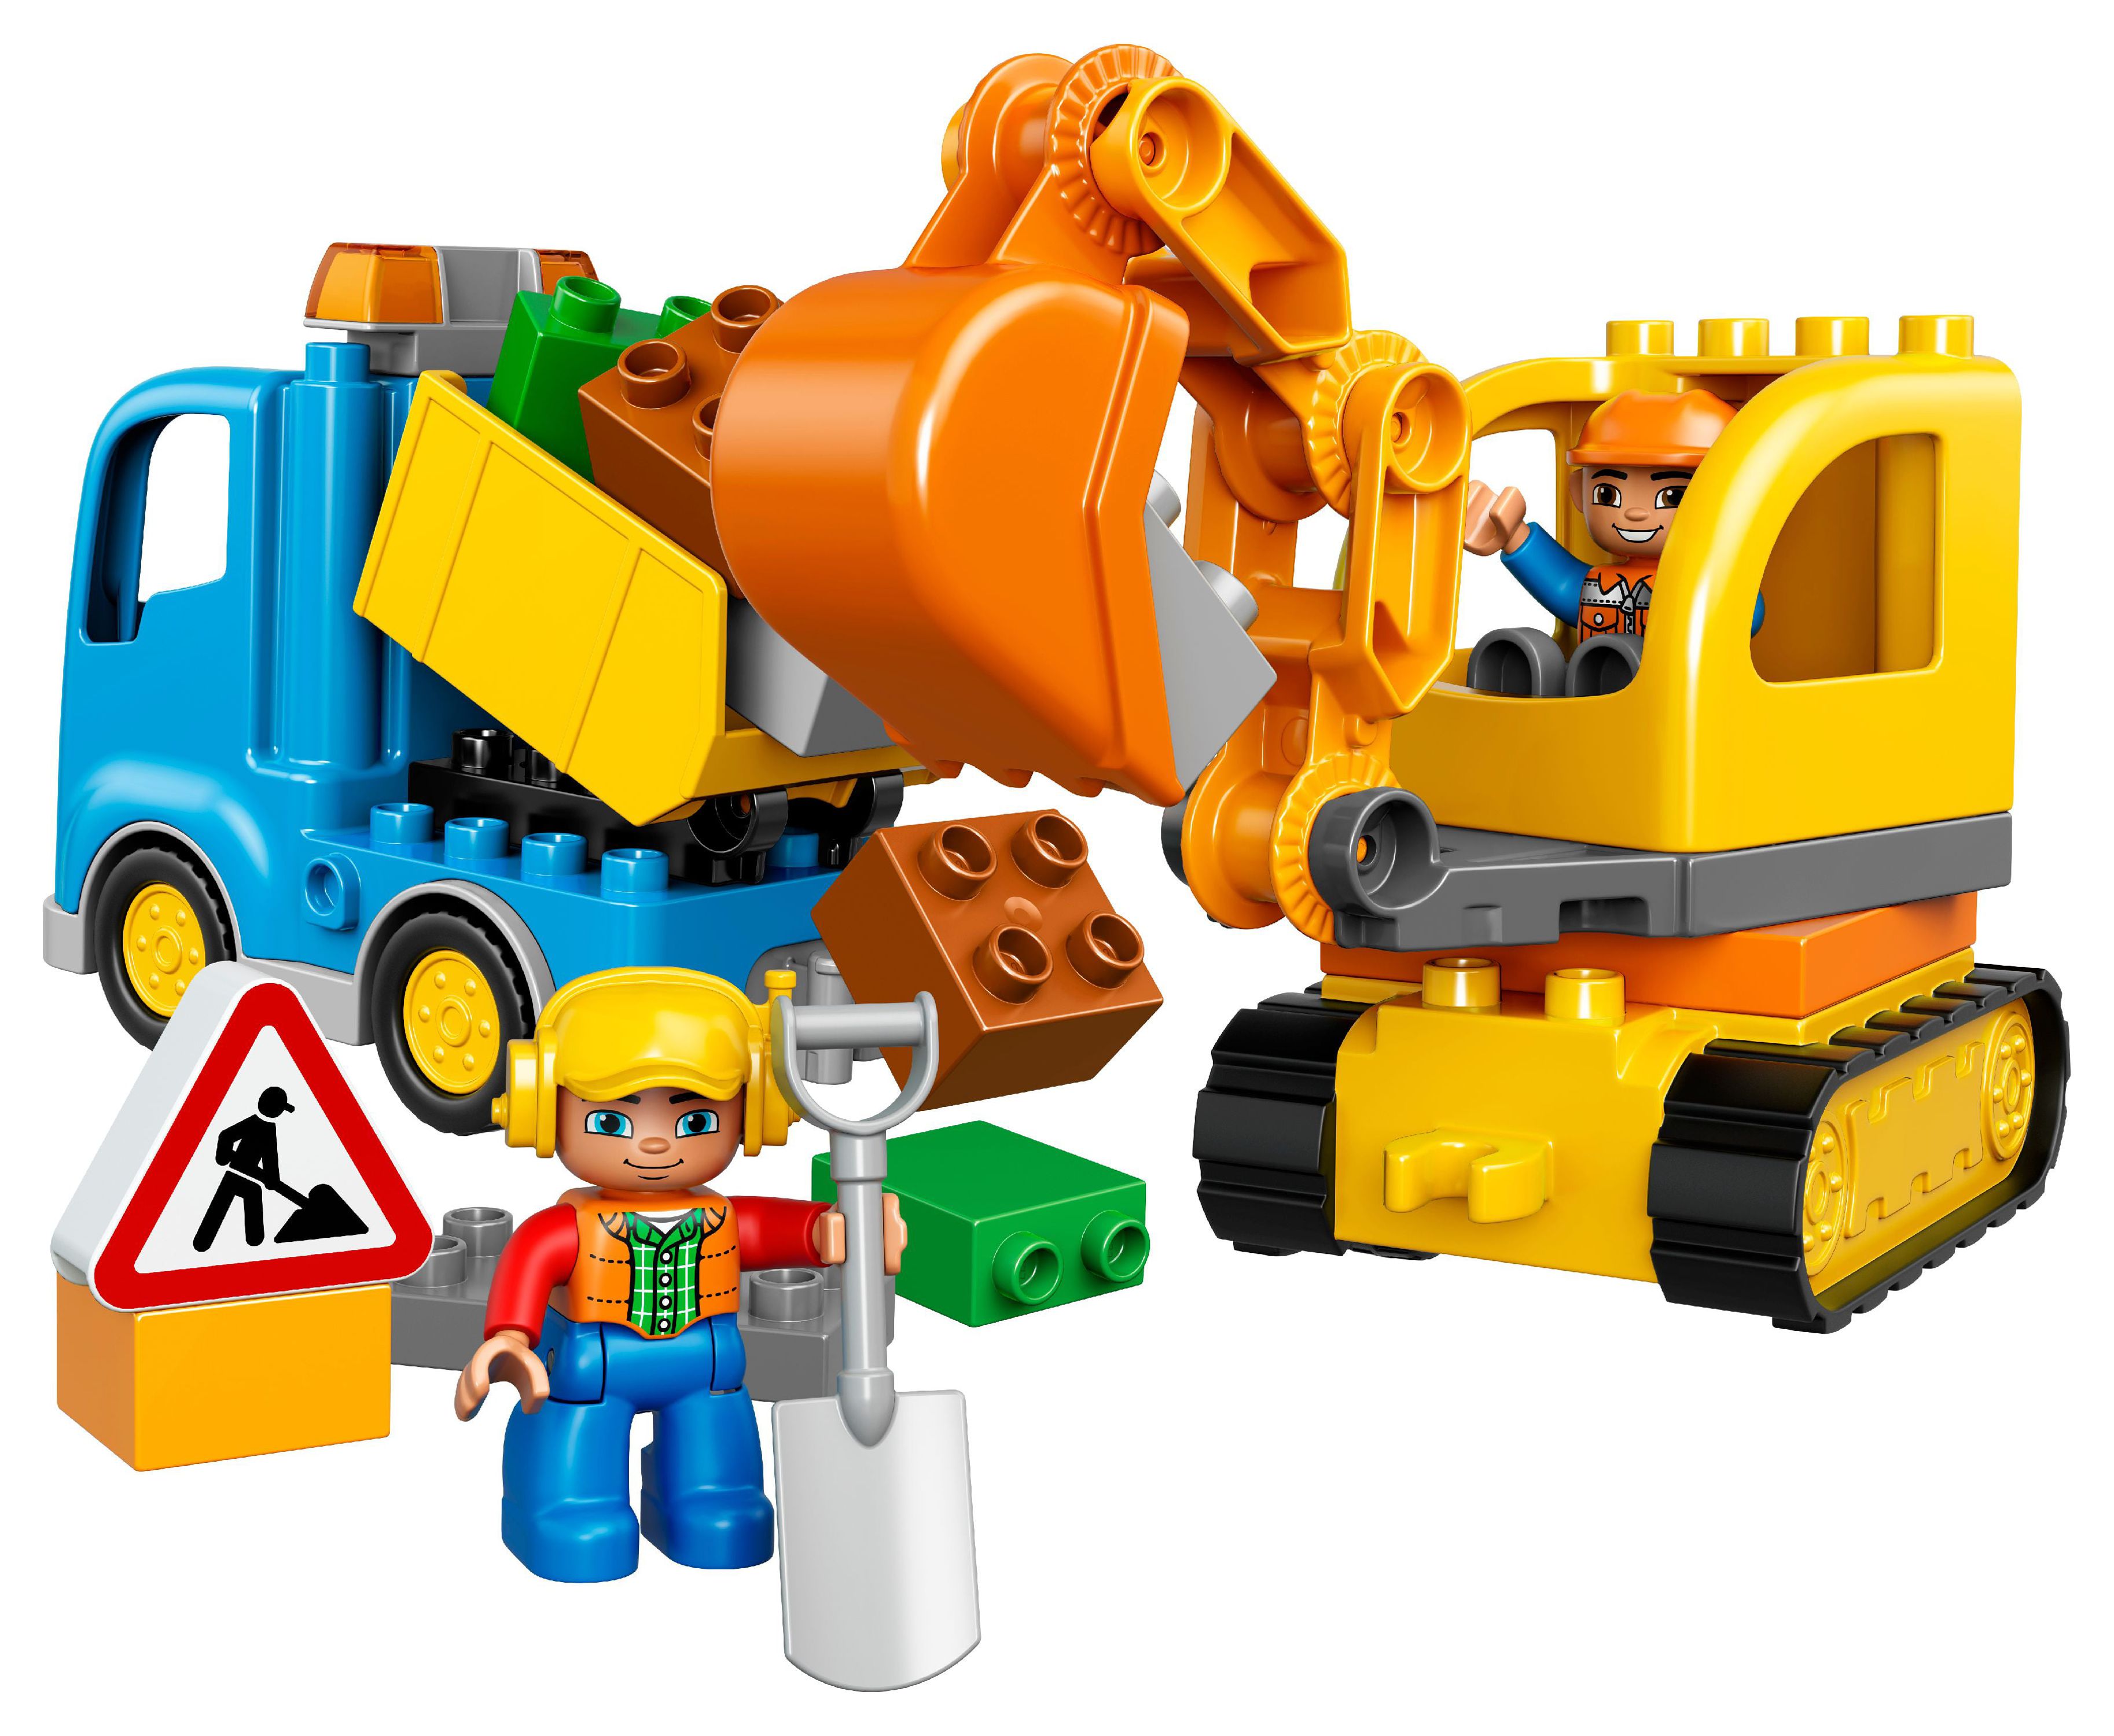 LEGO DUPLO Town Truck & Tracked Excavator 10812 (26 Pieces) - image 3 of 8